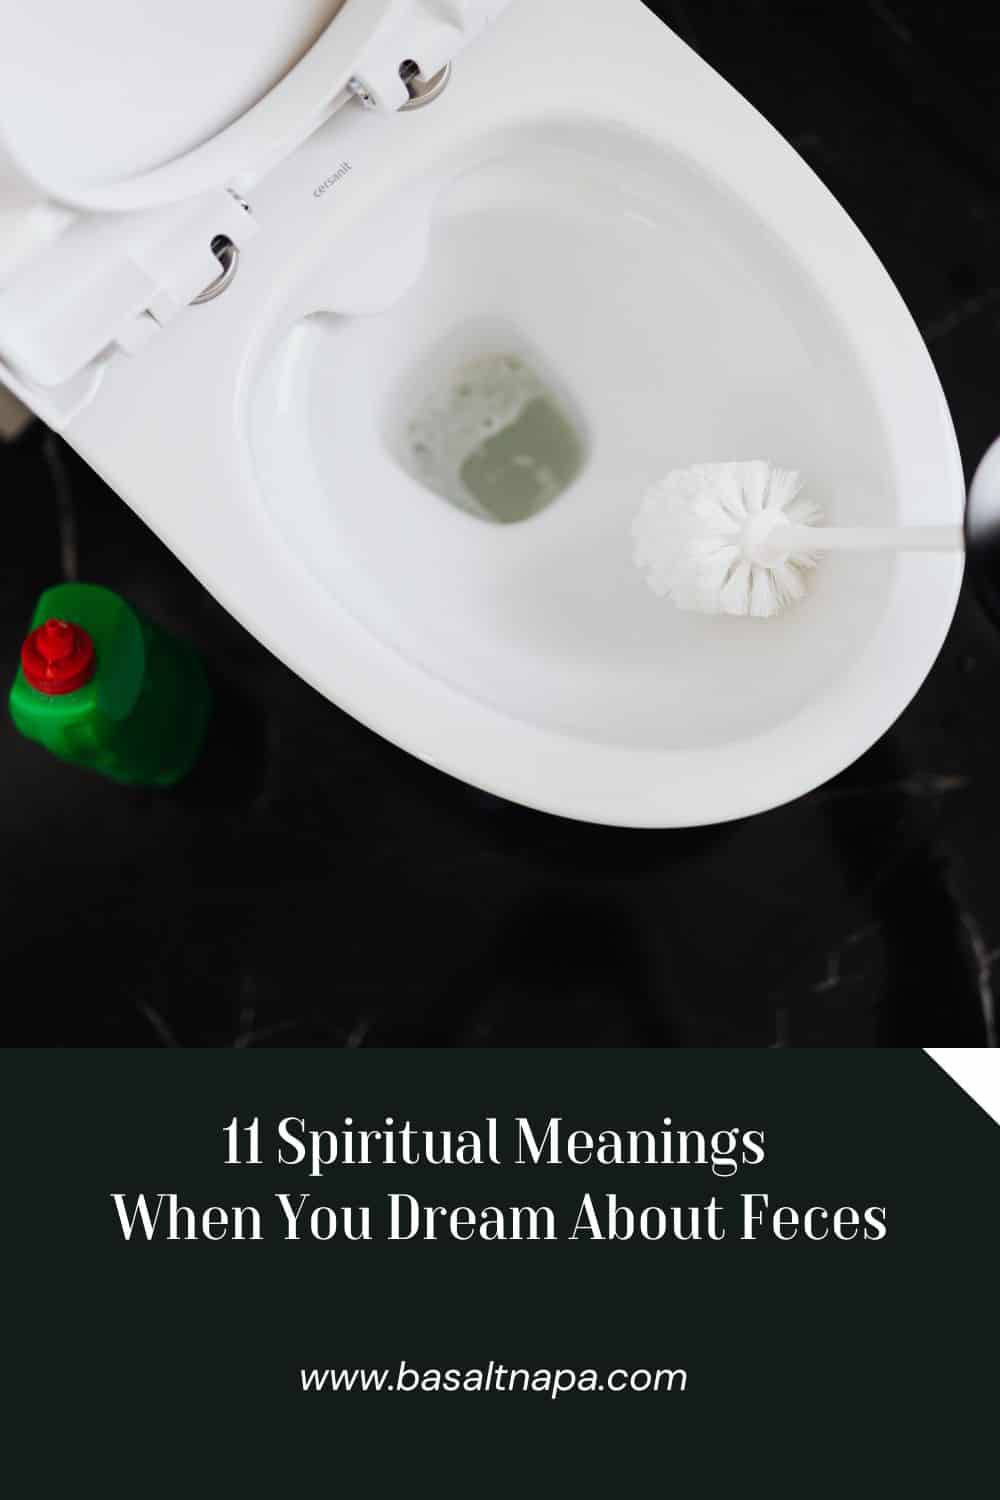 11 Spiritual Meanings When You Dream About Feces